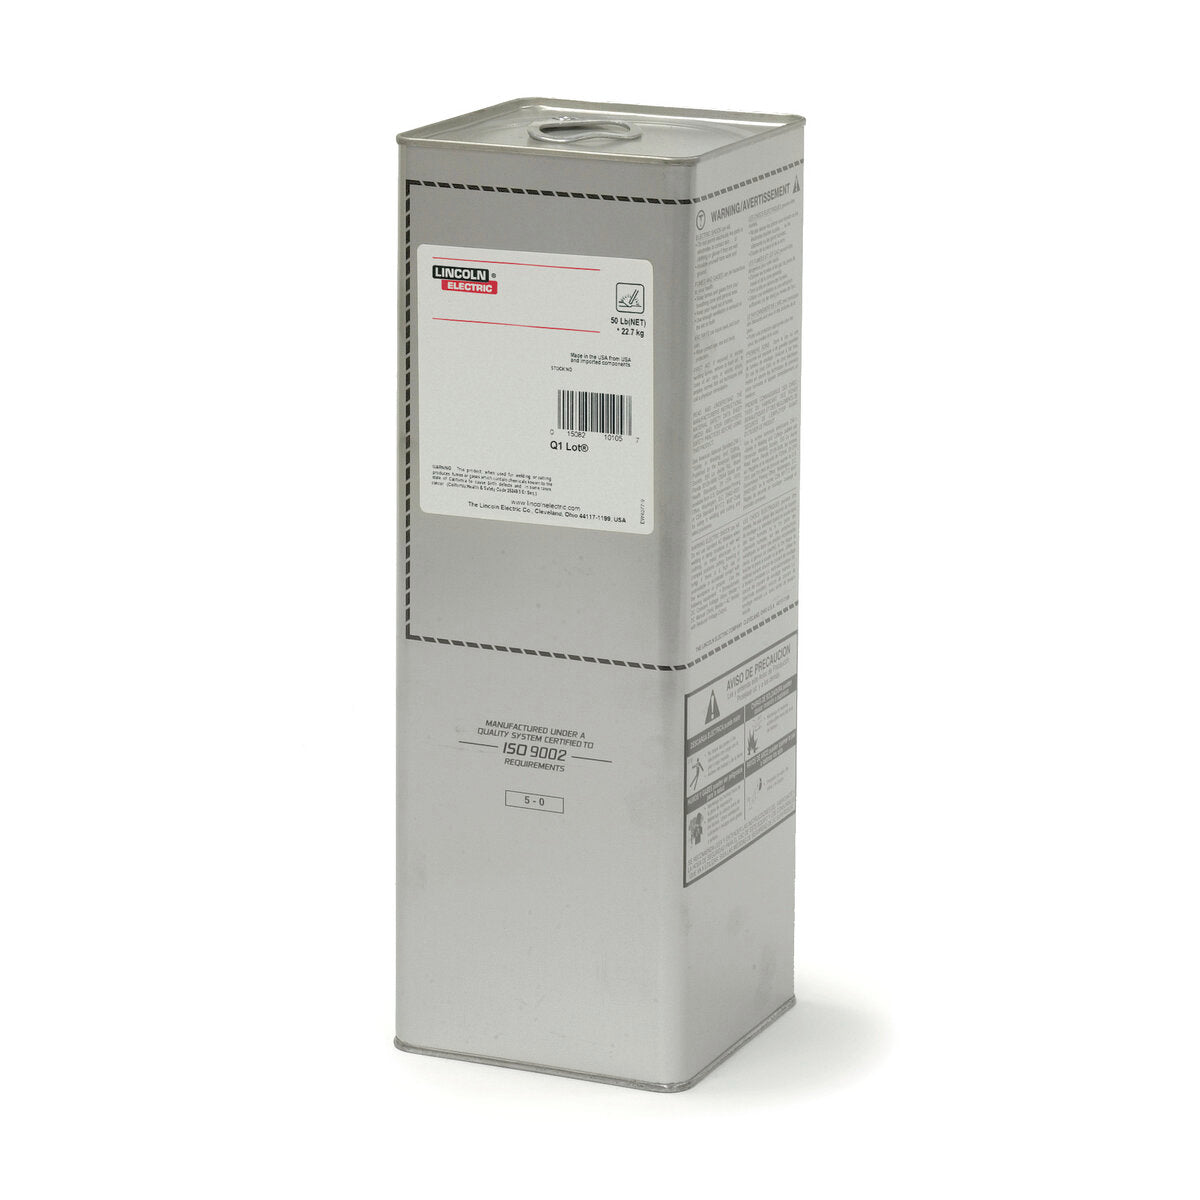 Lincoln Electric - Fleetweld® 35 Stick (SMAW) Electrode, 3/32x14 in, 50 lb Easy Open Can - ED028152